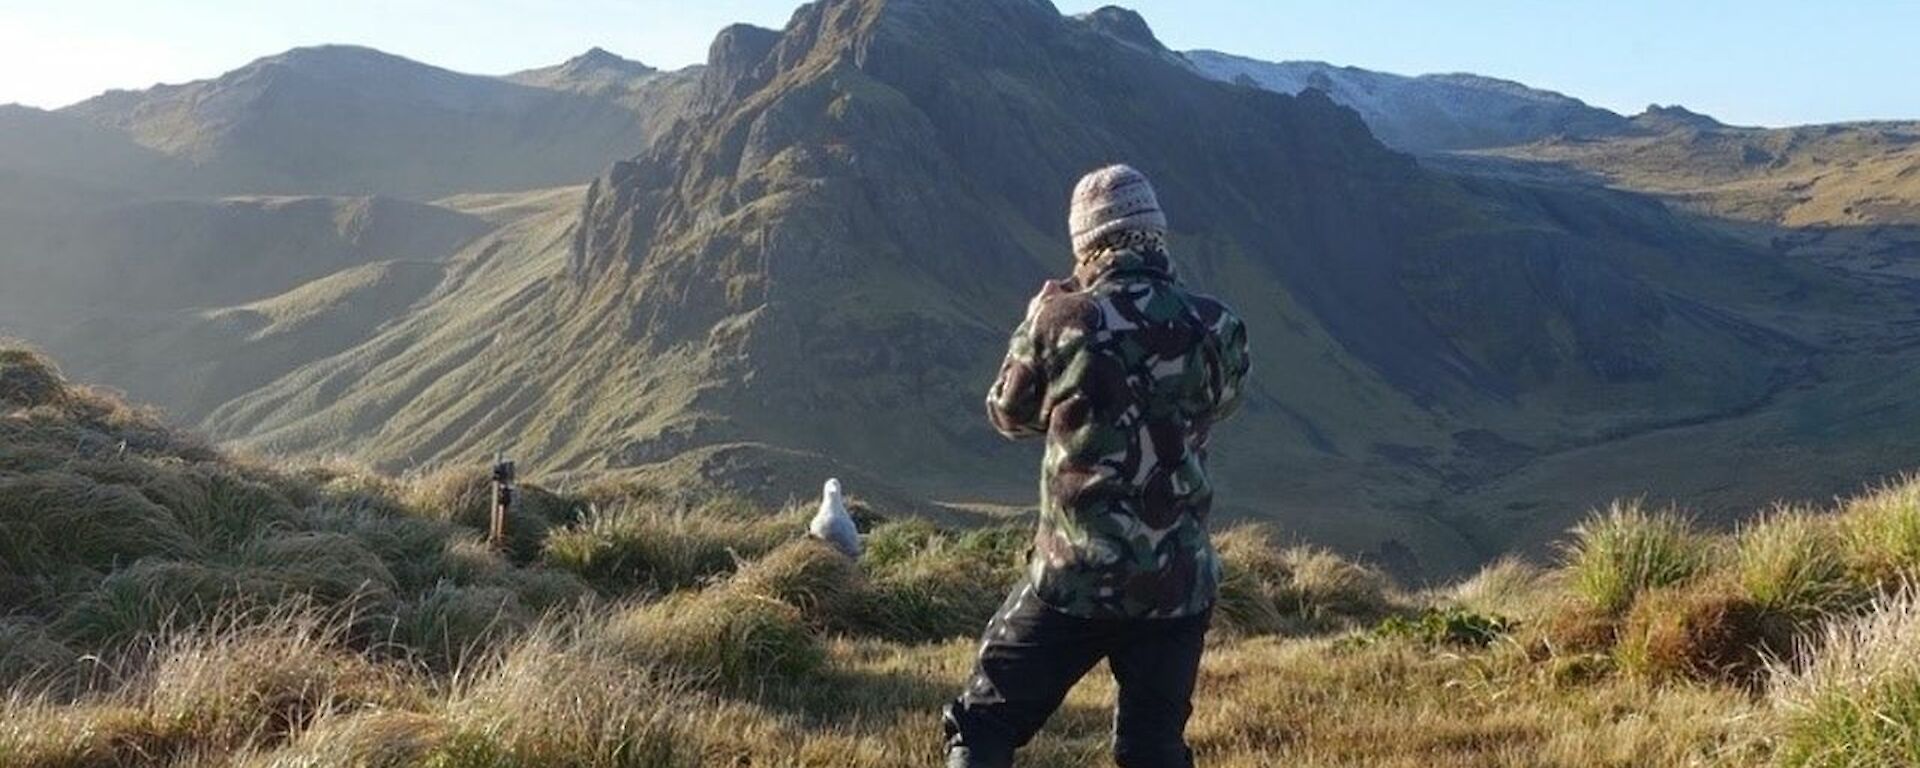 A woman in camouflage jacket is standing in front of a wandering albatross